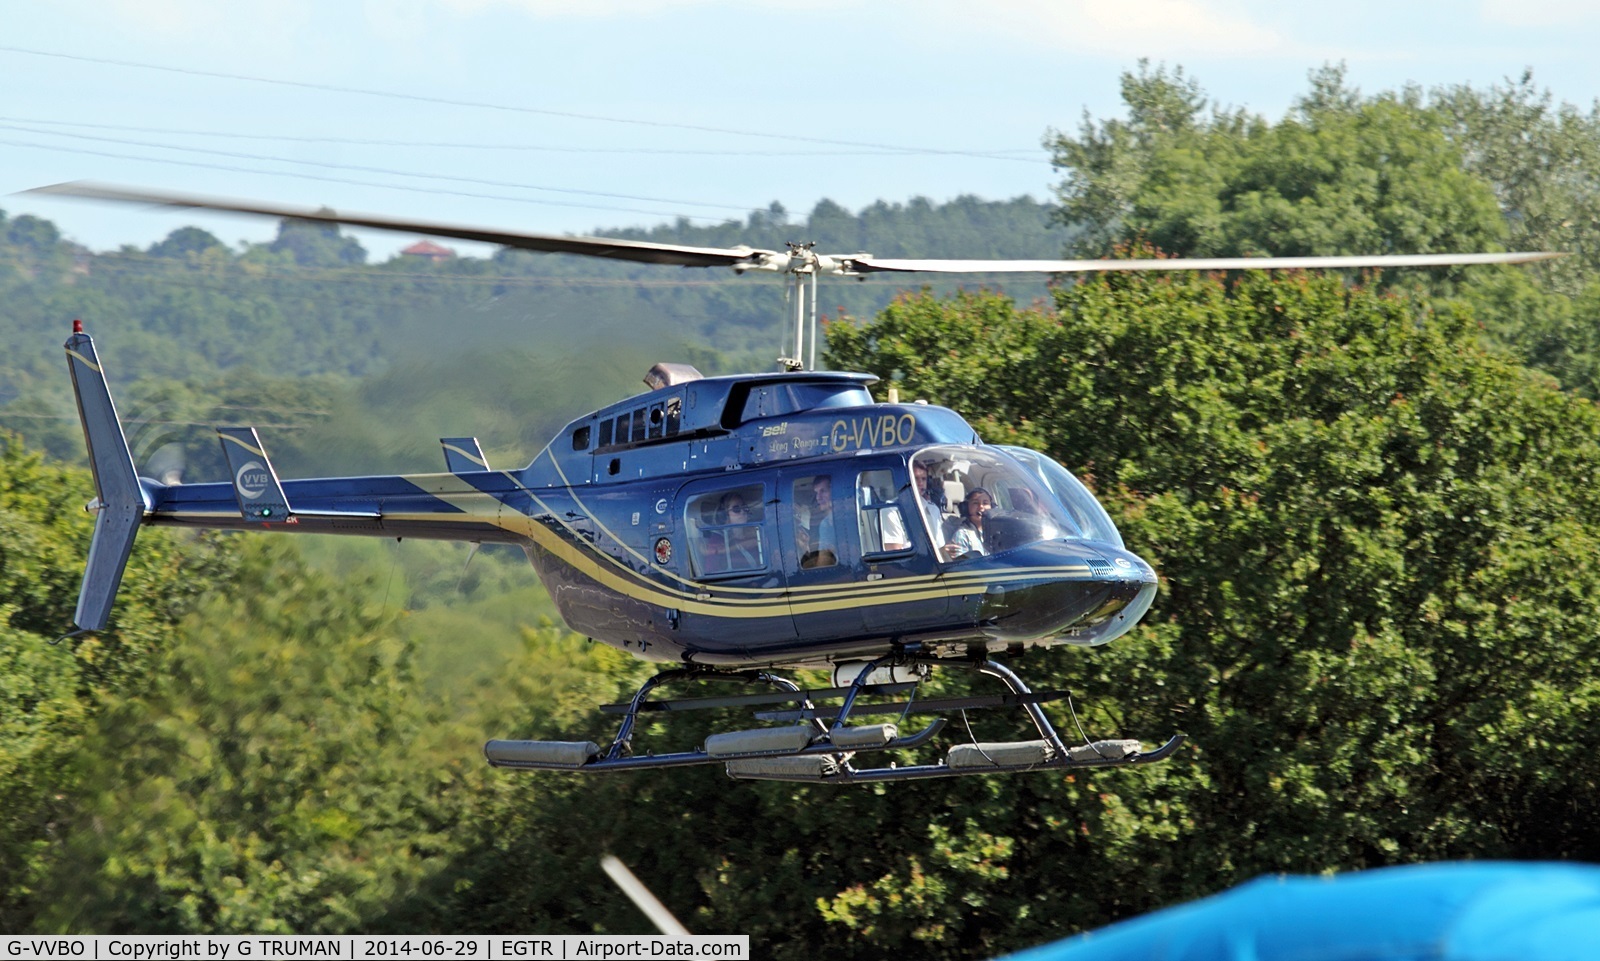 G-VVBO, 1989 Bell 206L-3 LongRanger III C/N 51284, Returning to base after a sightseeing trip